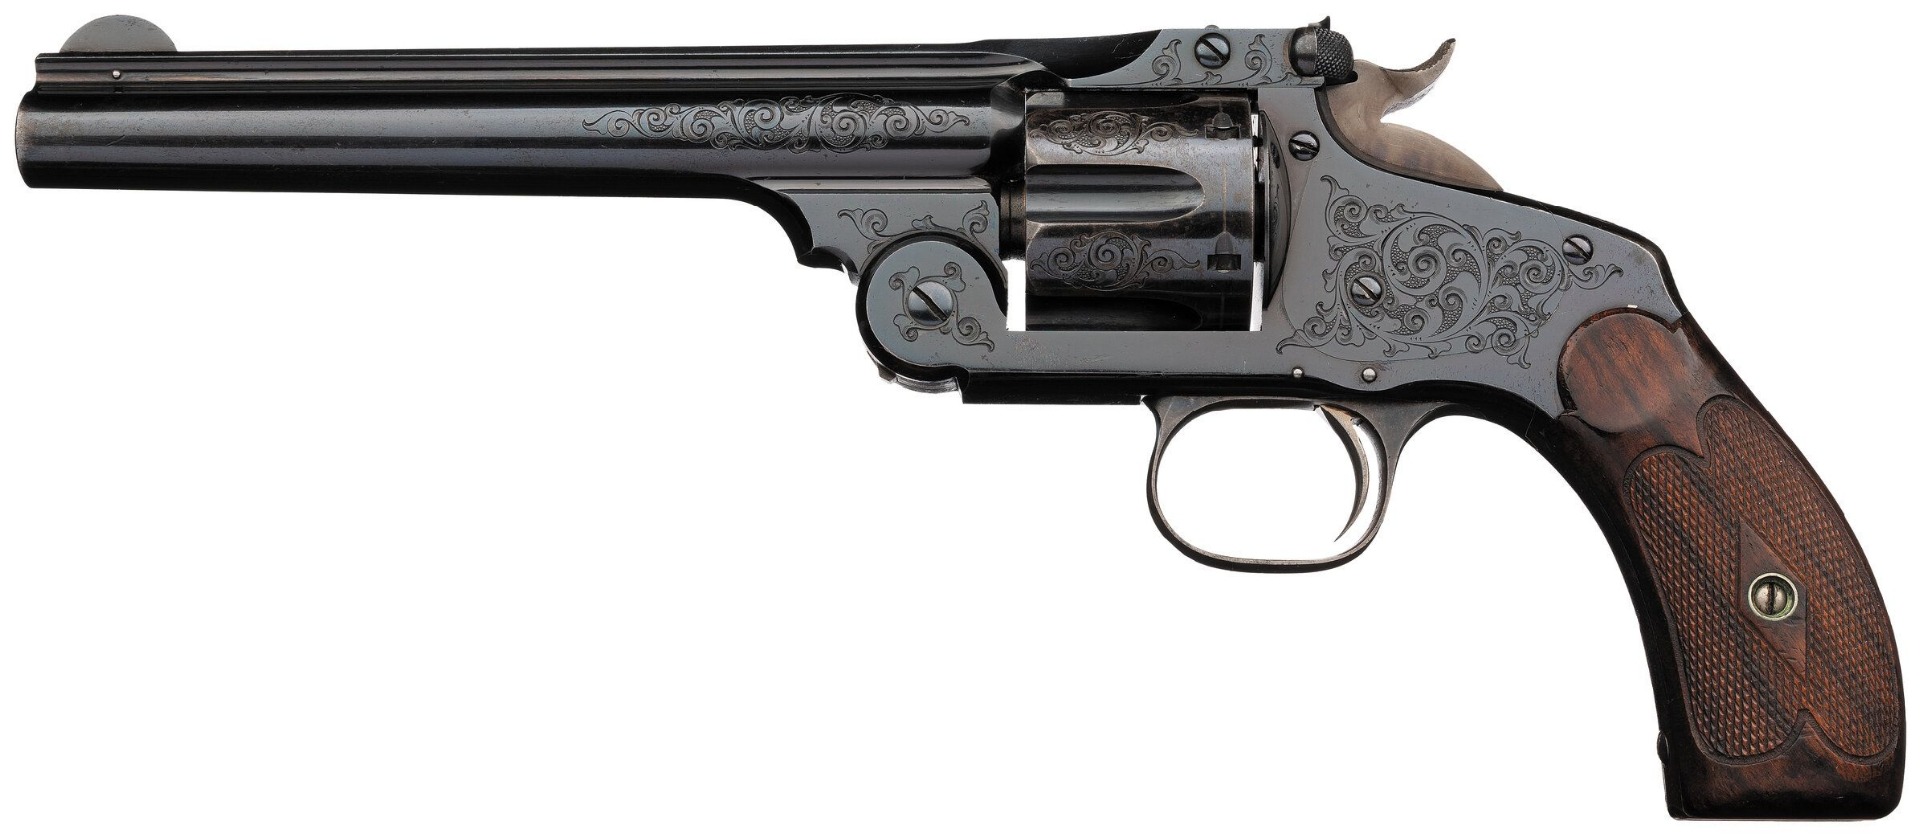 Theodore Roosevelt Smith and Wesson revolver